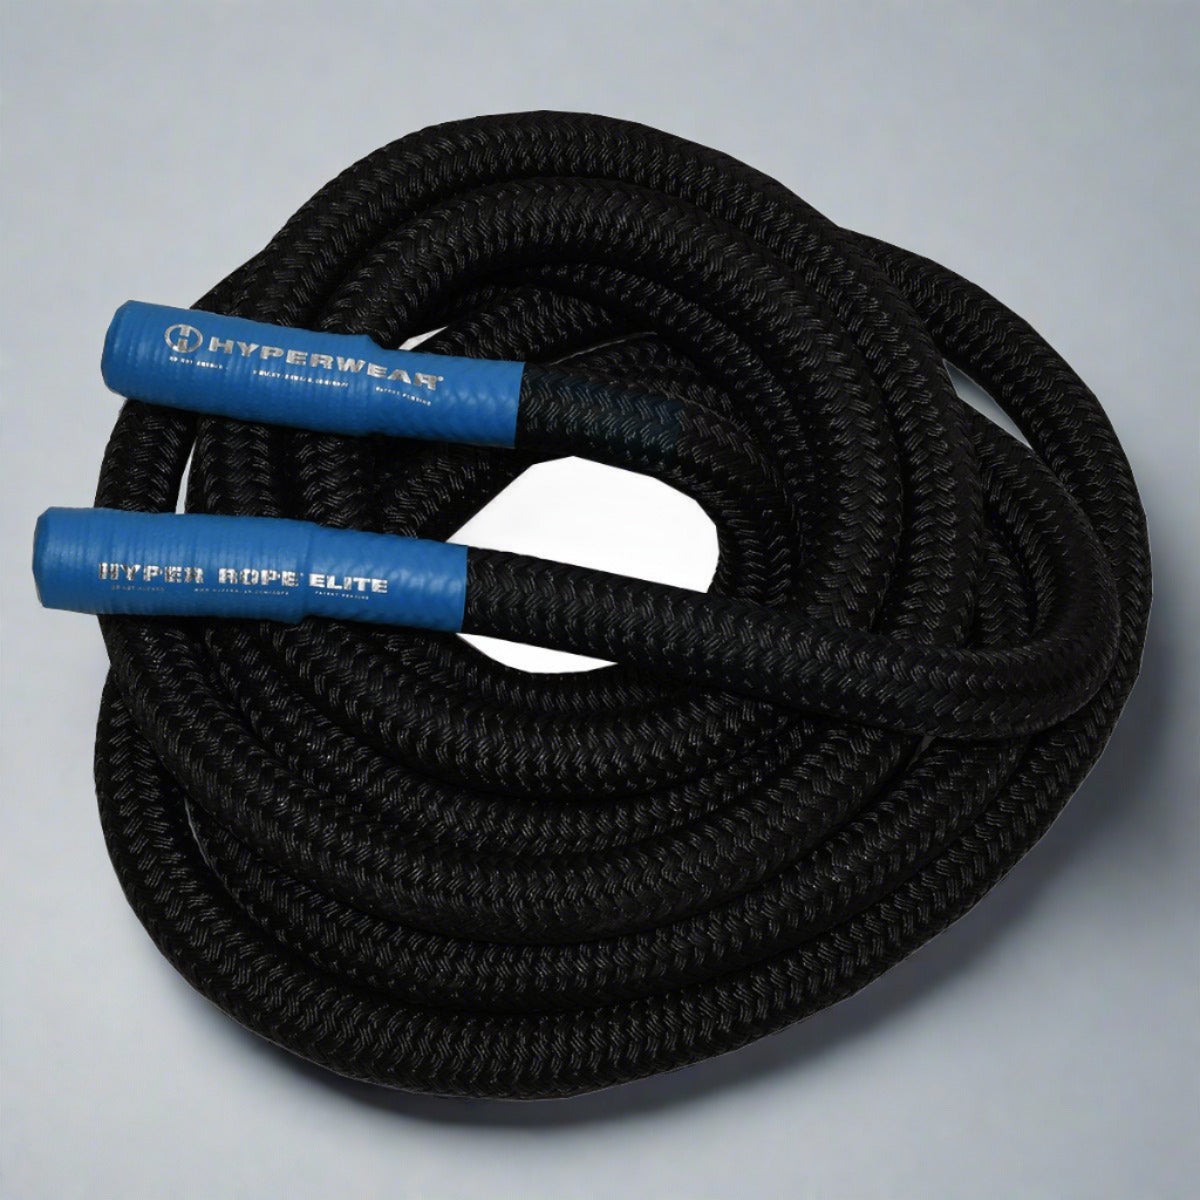 Product photo of a black braided hyper rope weighted battle rope with blue handles